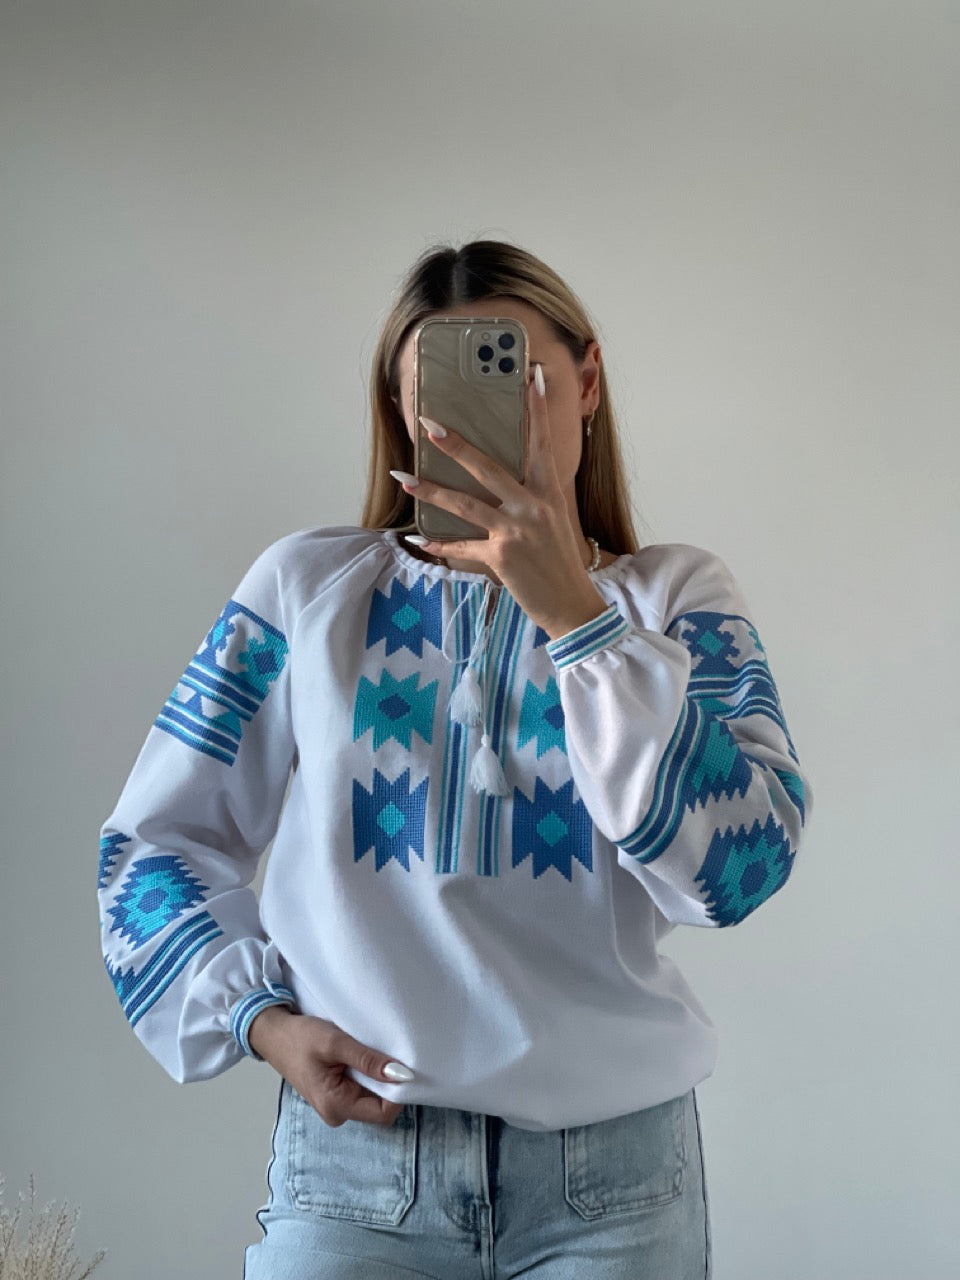 The White Women's Blouse with Blue Embroidery